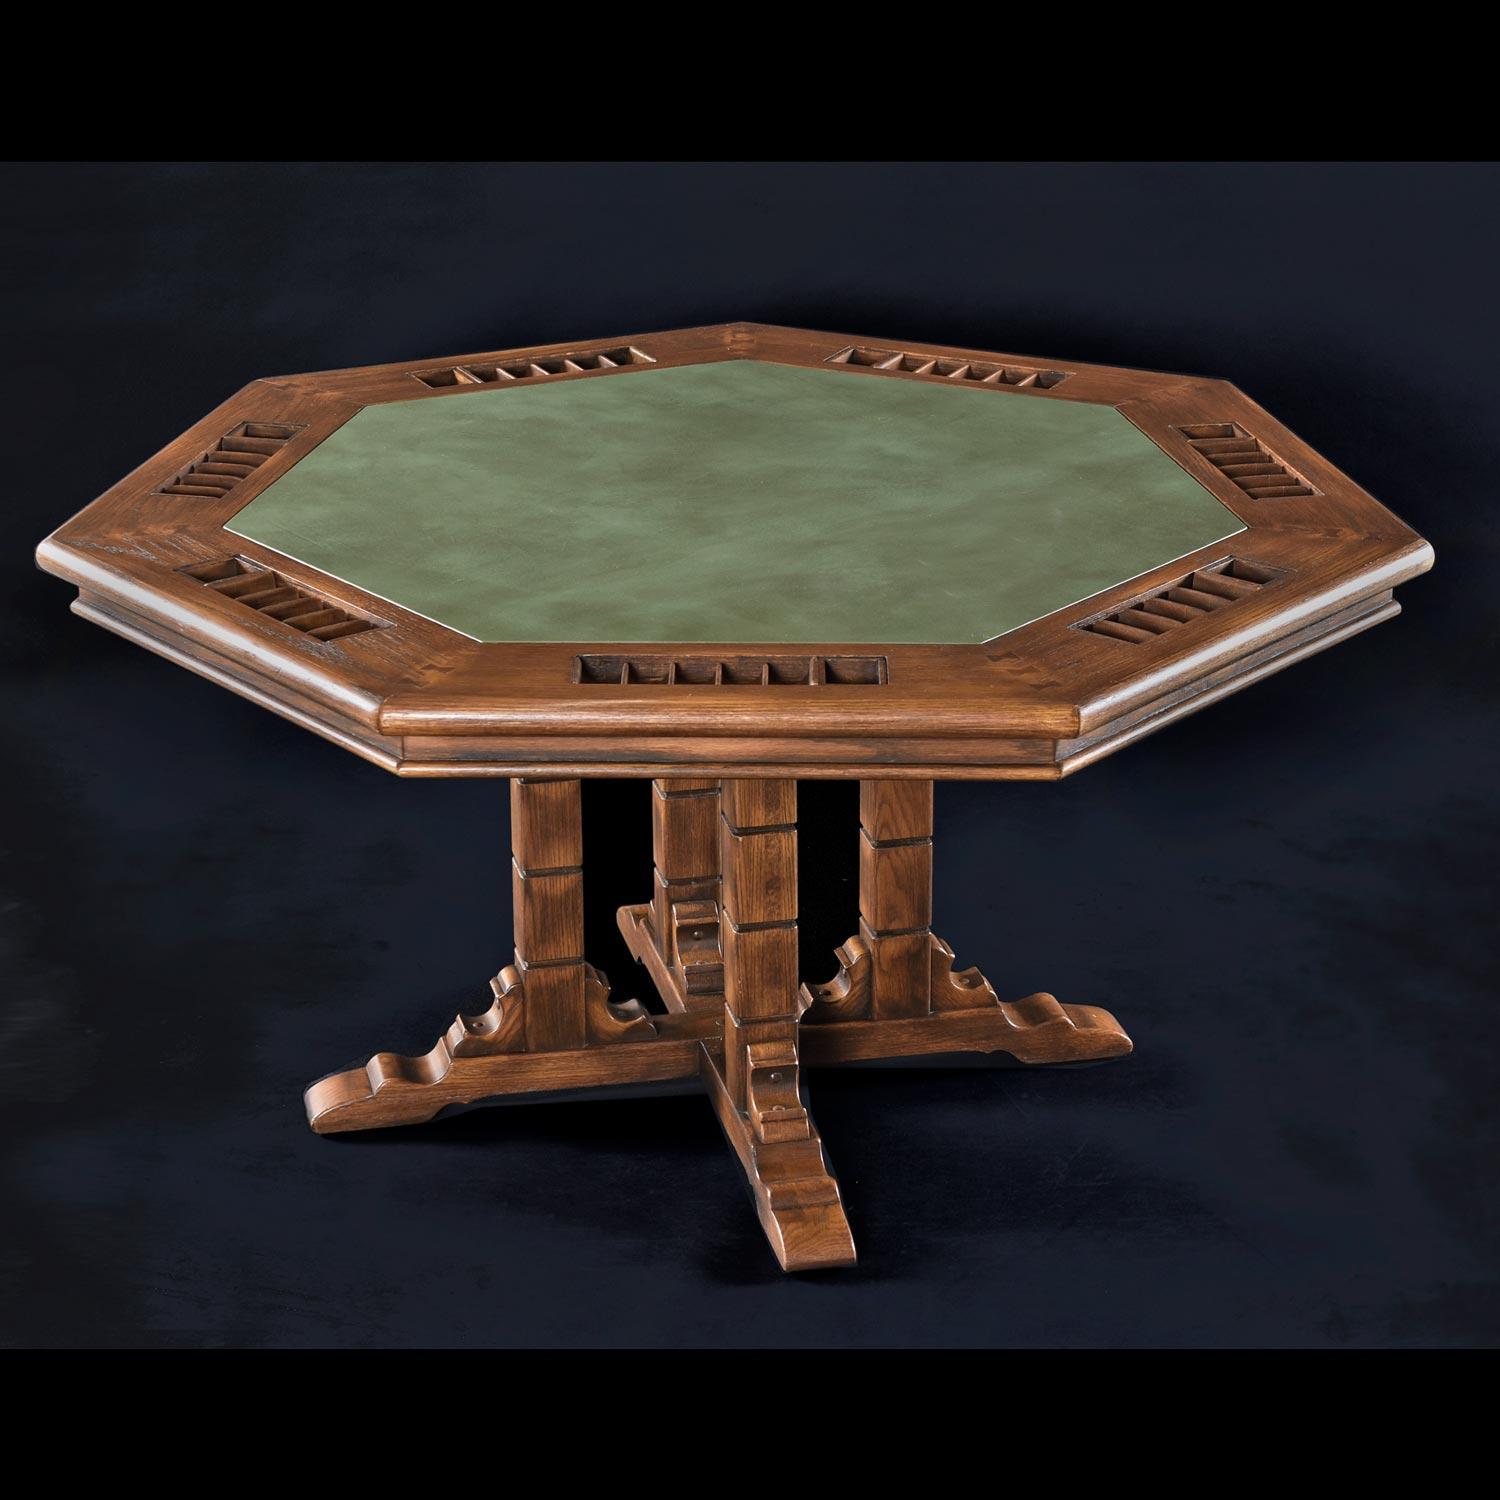 This outstanding viking oak poker table set by Romweber must have been a cherished possession. It’s truly astonishing to find a poker set in such amazing condition after nearly five decades. The Viking oak set is seven sided with seven chairs for